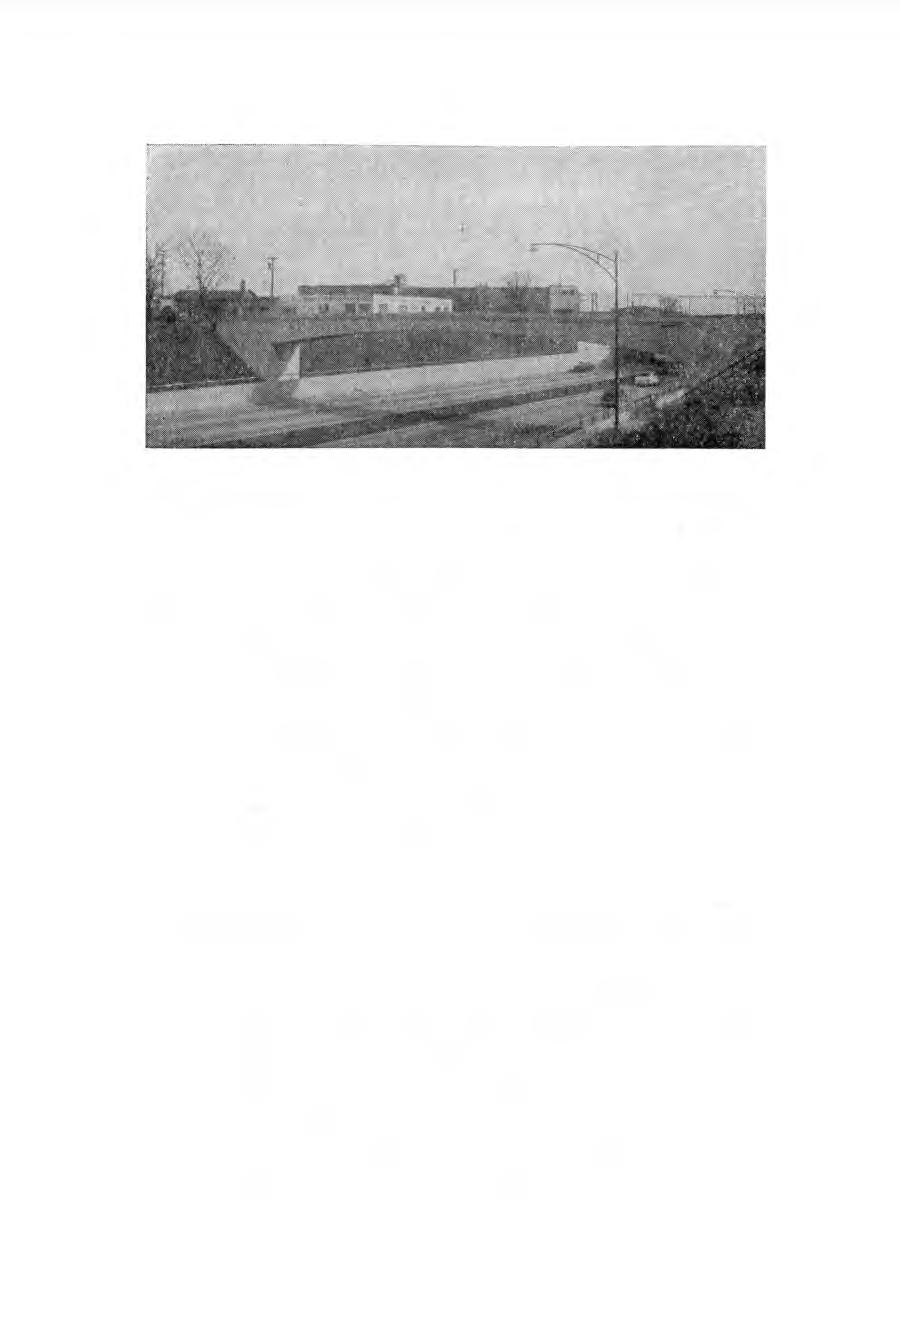 215 Fig. 16. Overpass school crossing at Indianapolis. At another location (Fig. 16), 74.